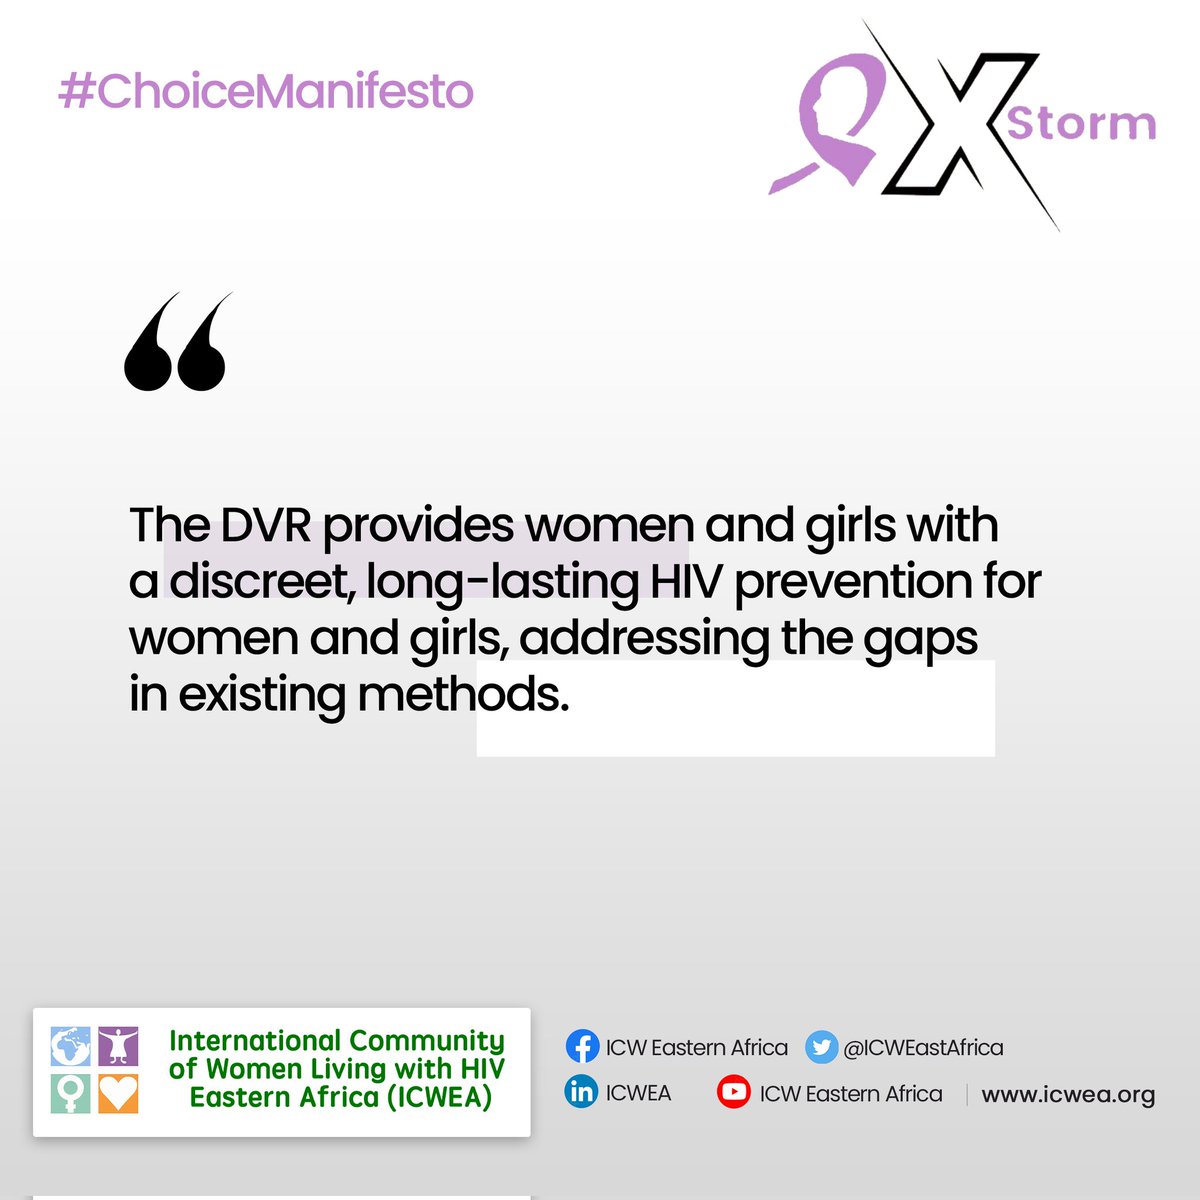 A World without HIV and AIDS. Women and girls the ball is on our hands. Prevent yourselves with DVR. @Aidsfonds @ICWEastAfrica @UNAIDS @GlobalFund @PEPFAR @Jnkengasong @aidscommission @HIVpxresearch @unwomenuganda #DVRForChoice #OptionsForHer #PreventionByChoice